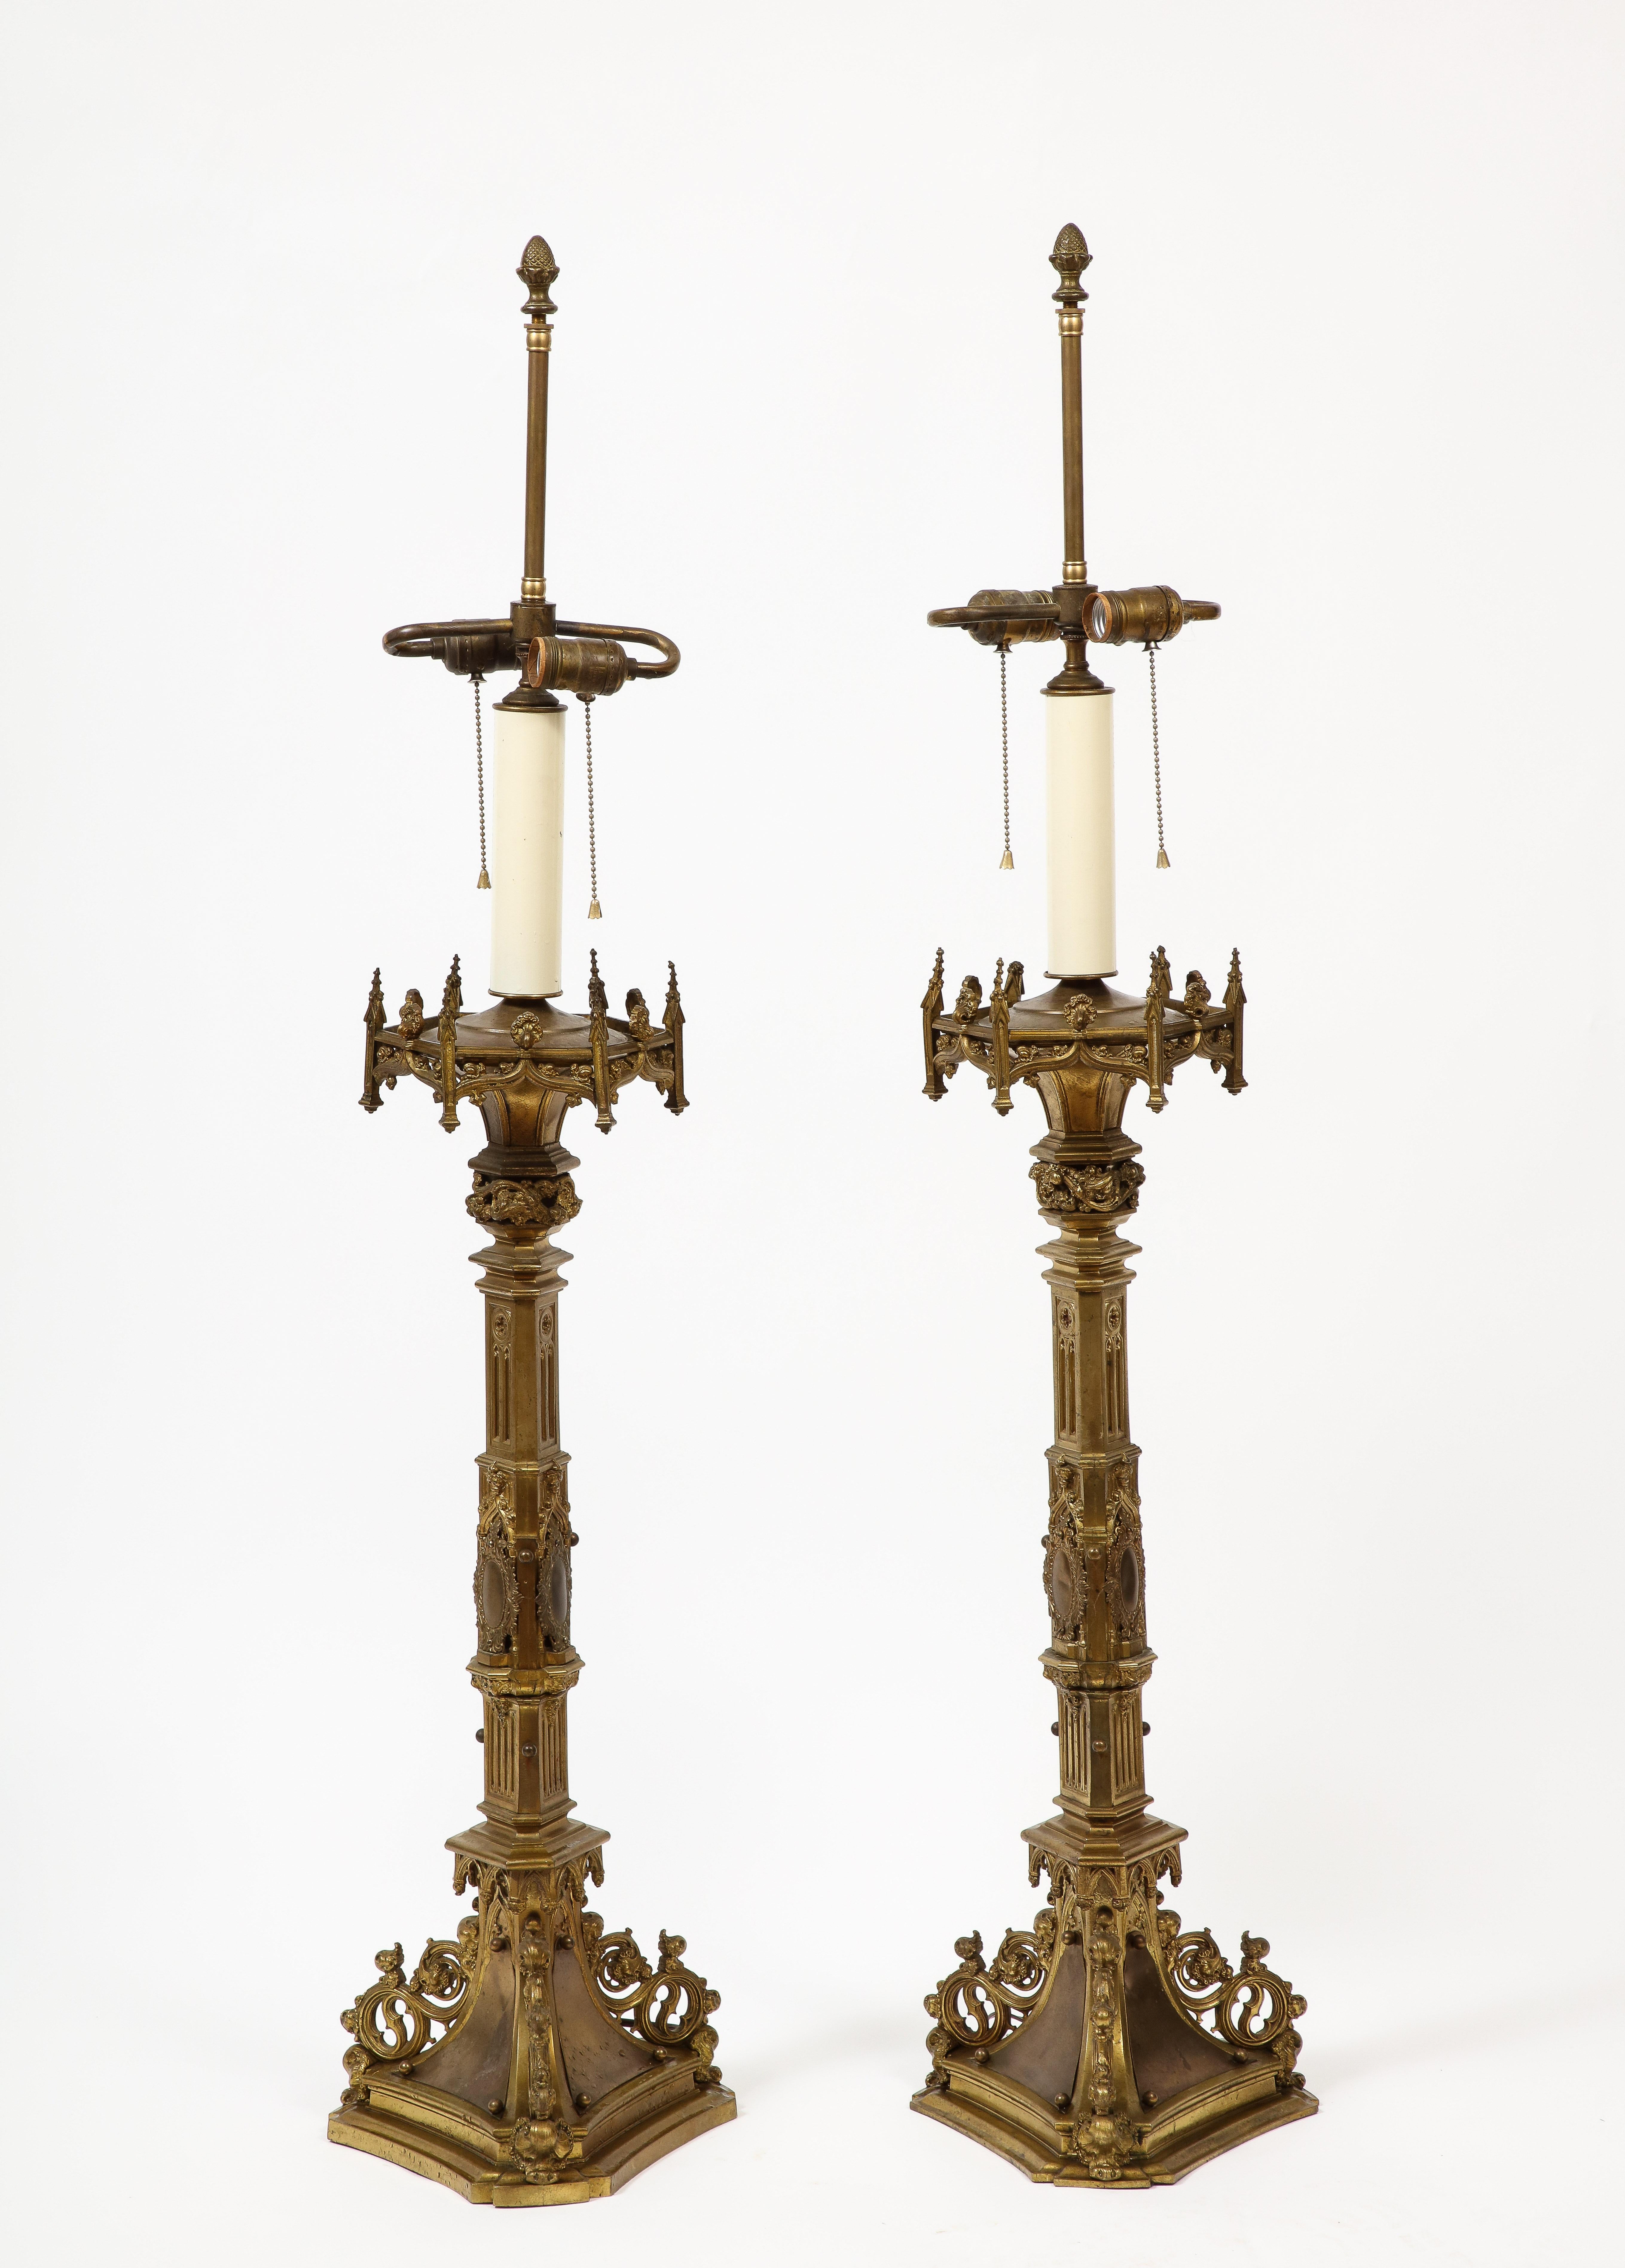 Pair of ornate Rococo style gilt metal table lamps, 20th century Belgian. Two sockets per lamp with pull chain for each socket. 

Additional dimensions:
upper hexagon 8